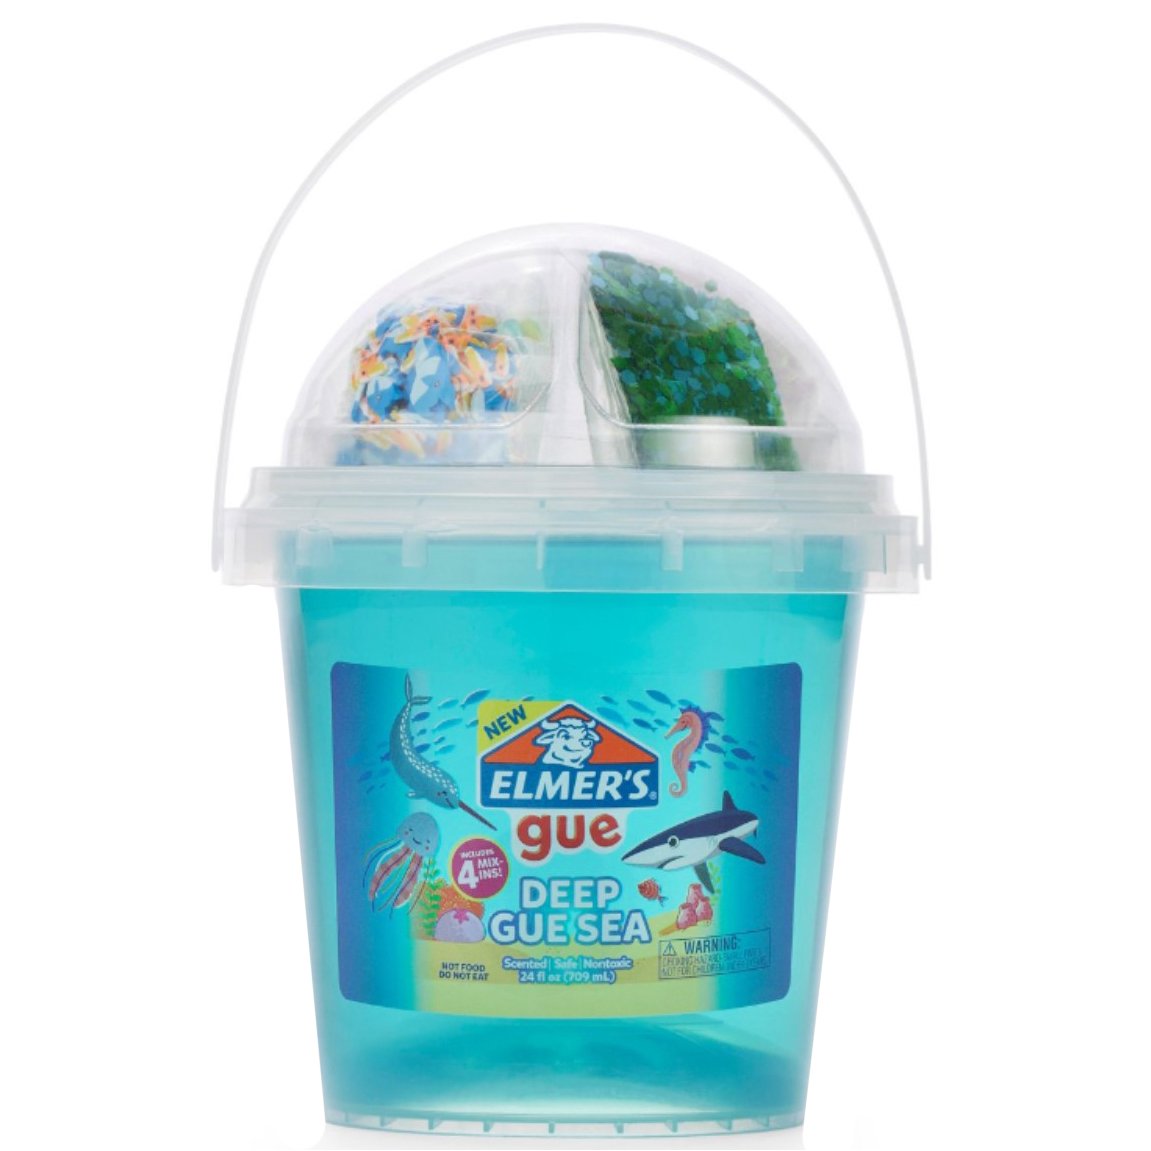 Elmers Opaque Slime Kit With Magicial Liquid - Shop Kits at H-E-B